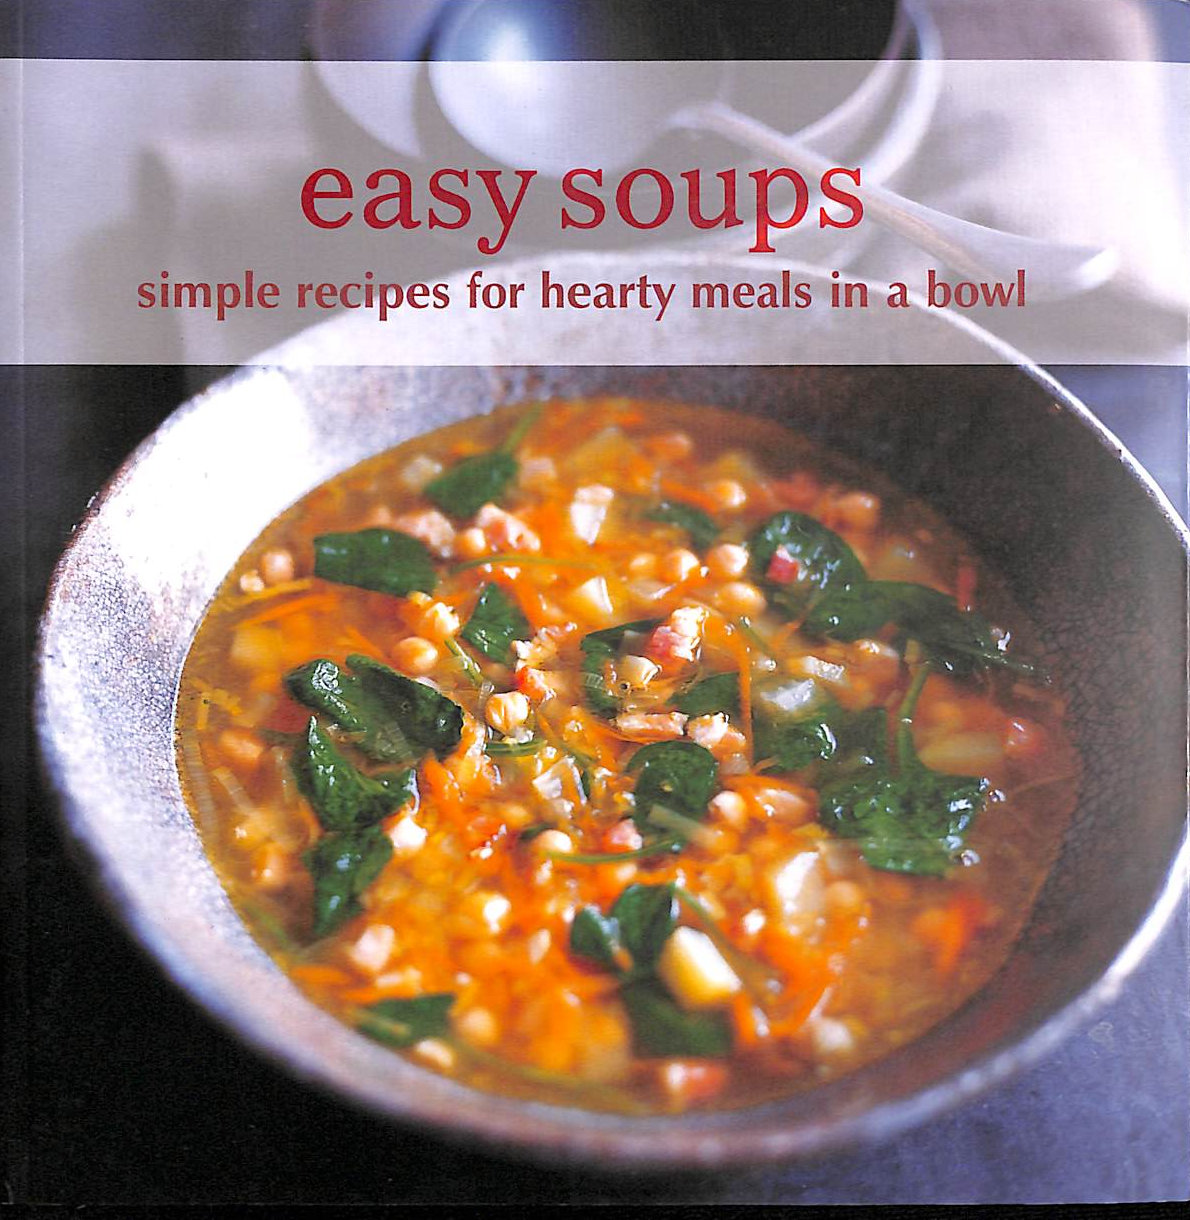 VARIOUS - Easy Soups: Simple Recipes for Hearty Meals in a Bowl